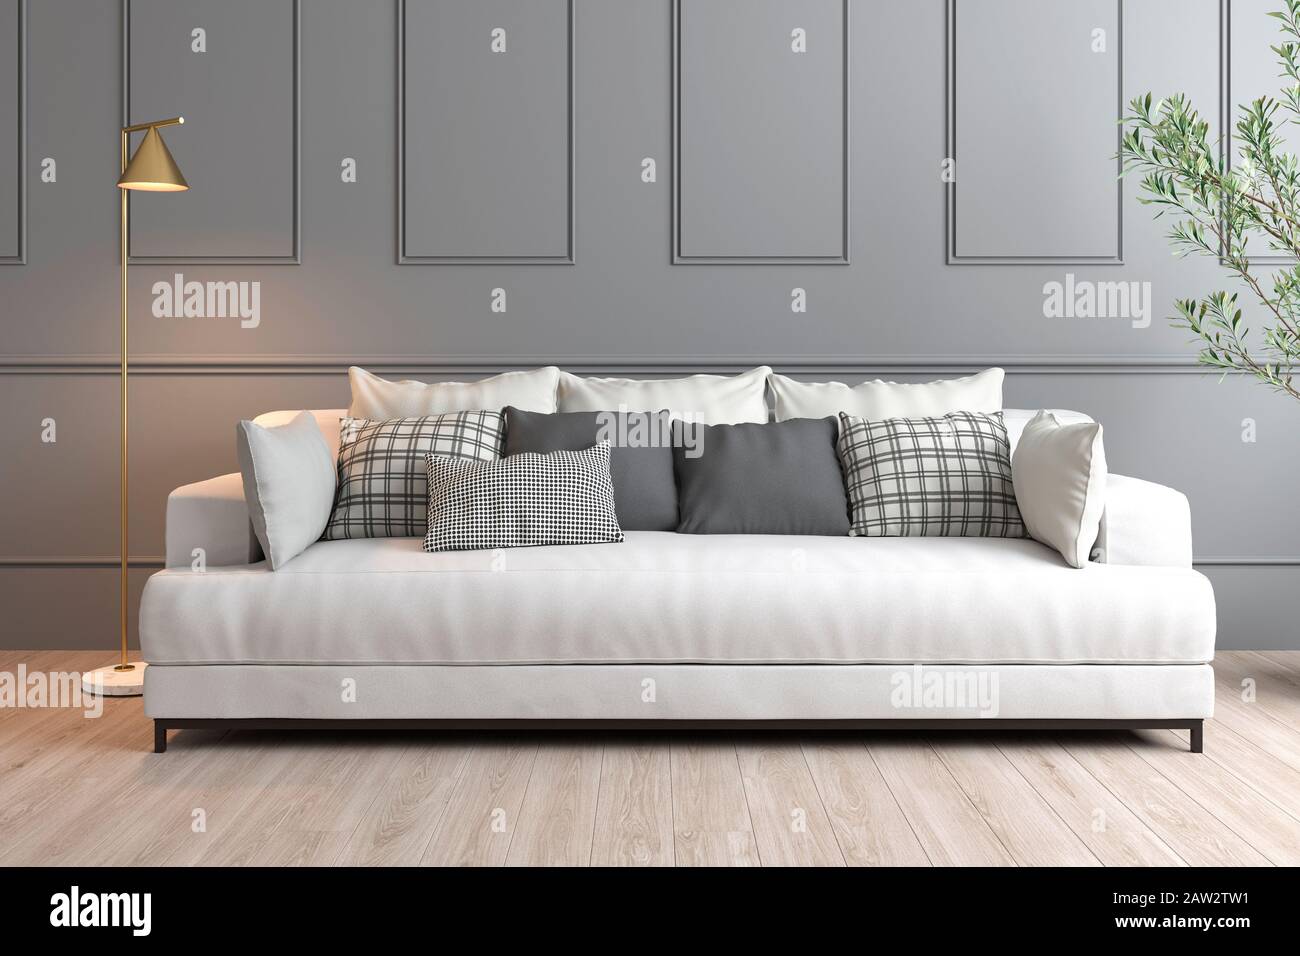 3D rendering of interior design with grey wall, white sofa and golden lamp Stock Photo